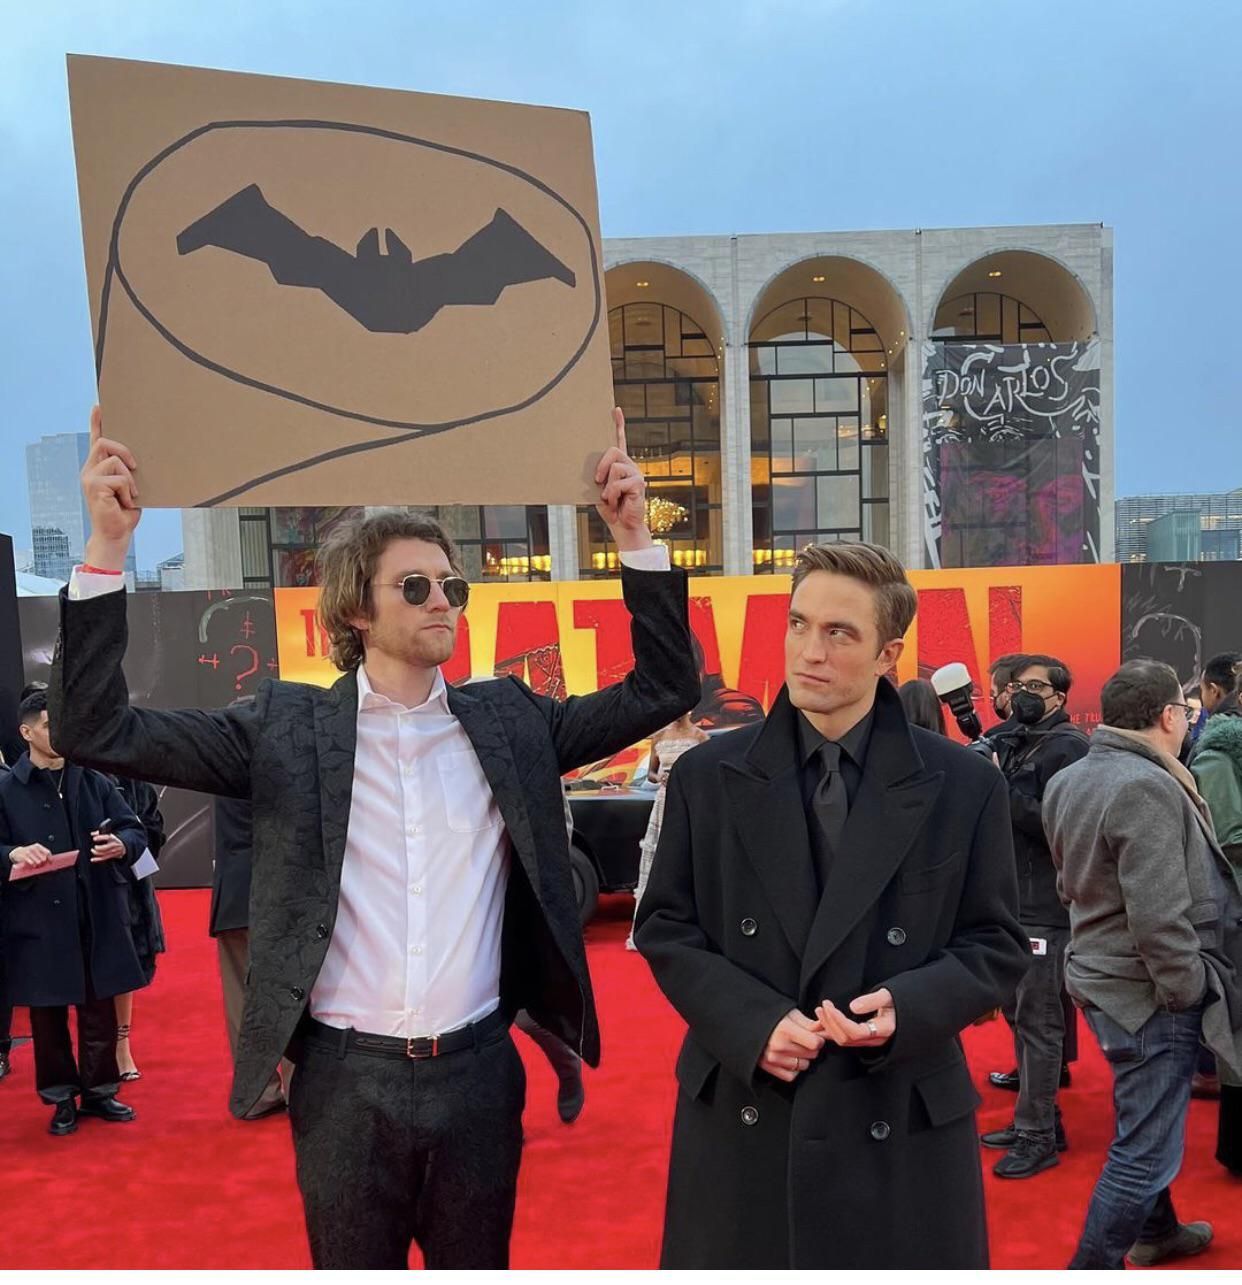 Dude with sign at Batman premiere